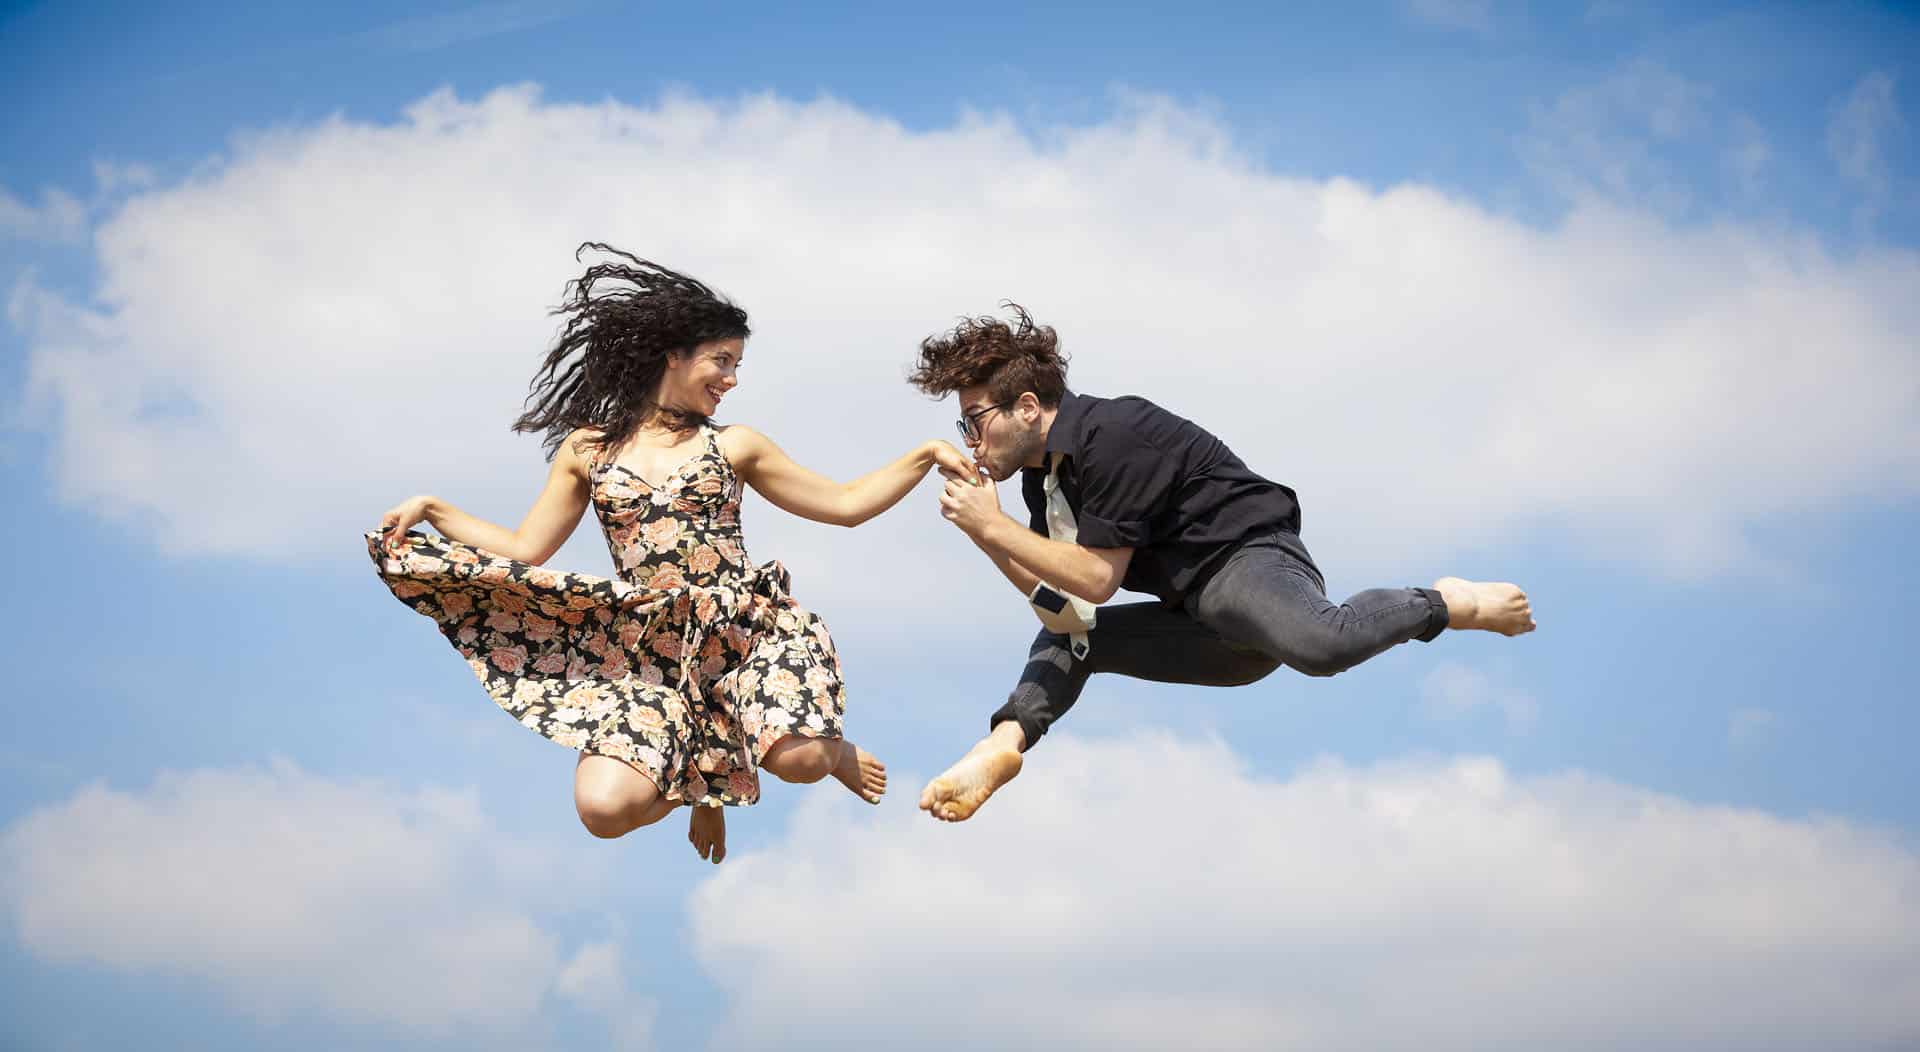 Happy jumping couple with hand kiss in mid-air.